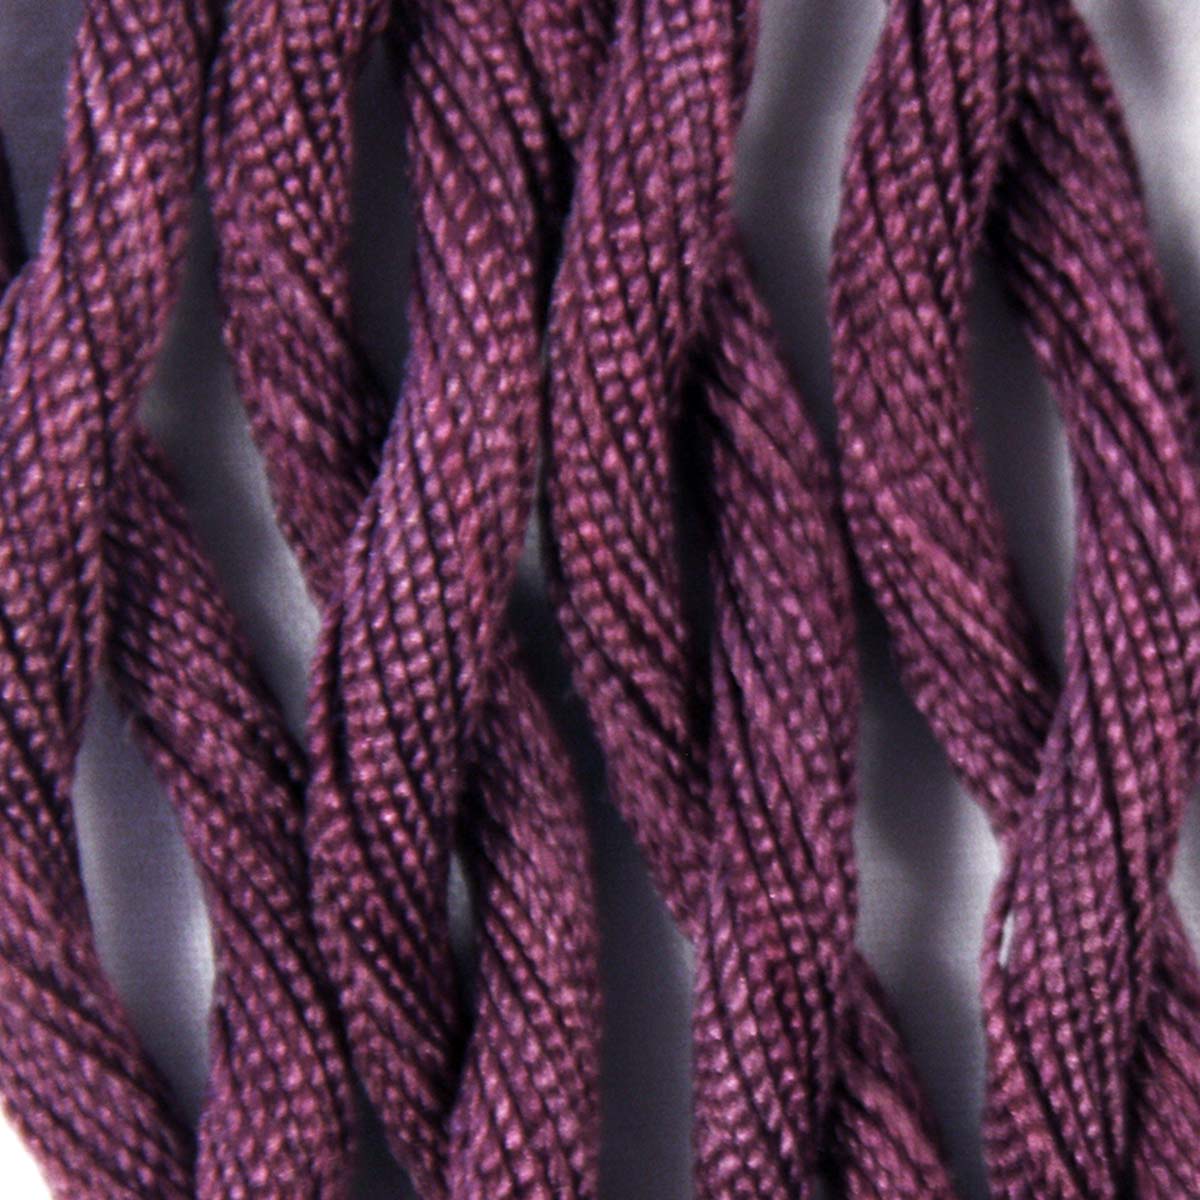 www.colourstreams.com.au Colour Streams Hand Dyed Silk Threads Silken Strands Ophir Exotic Lights Aurora Slow Stitch Embroidery Textile Arts Fibre DL  32 Berry Purples Pinks Reds